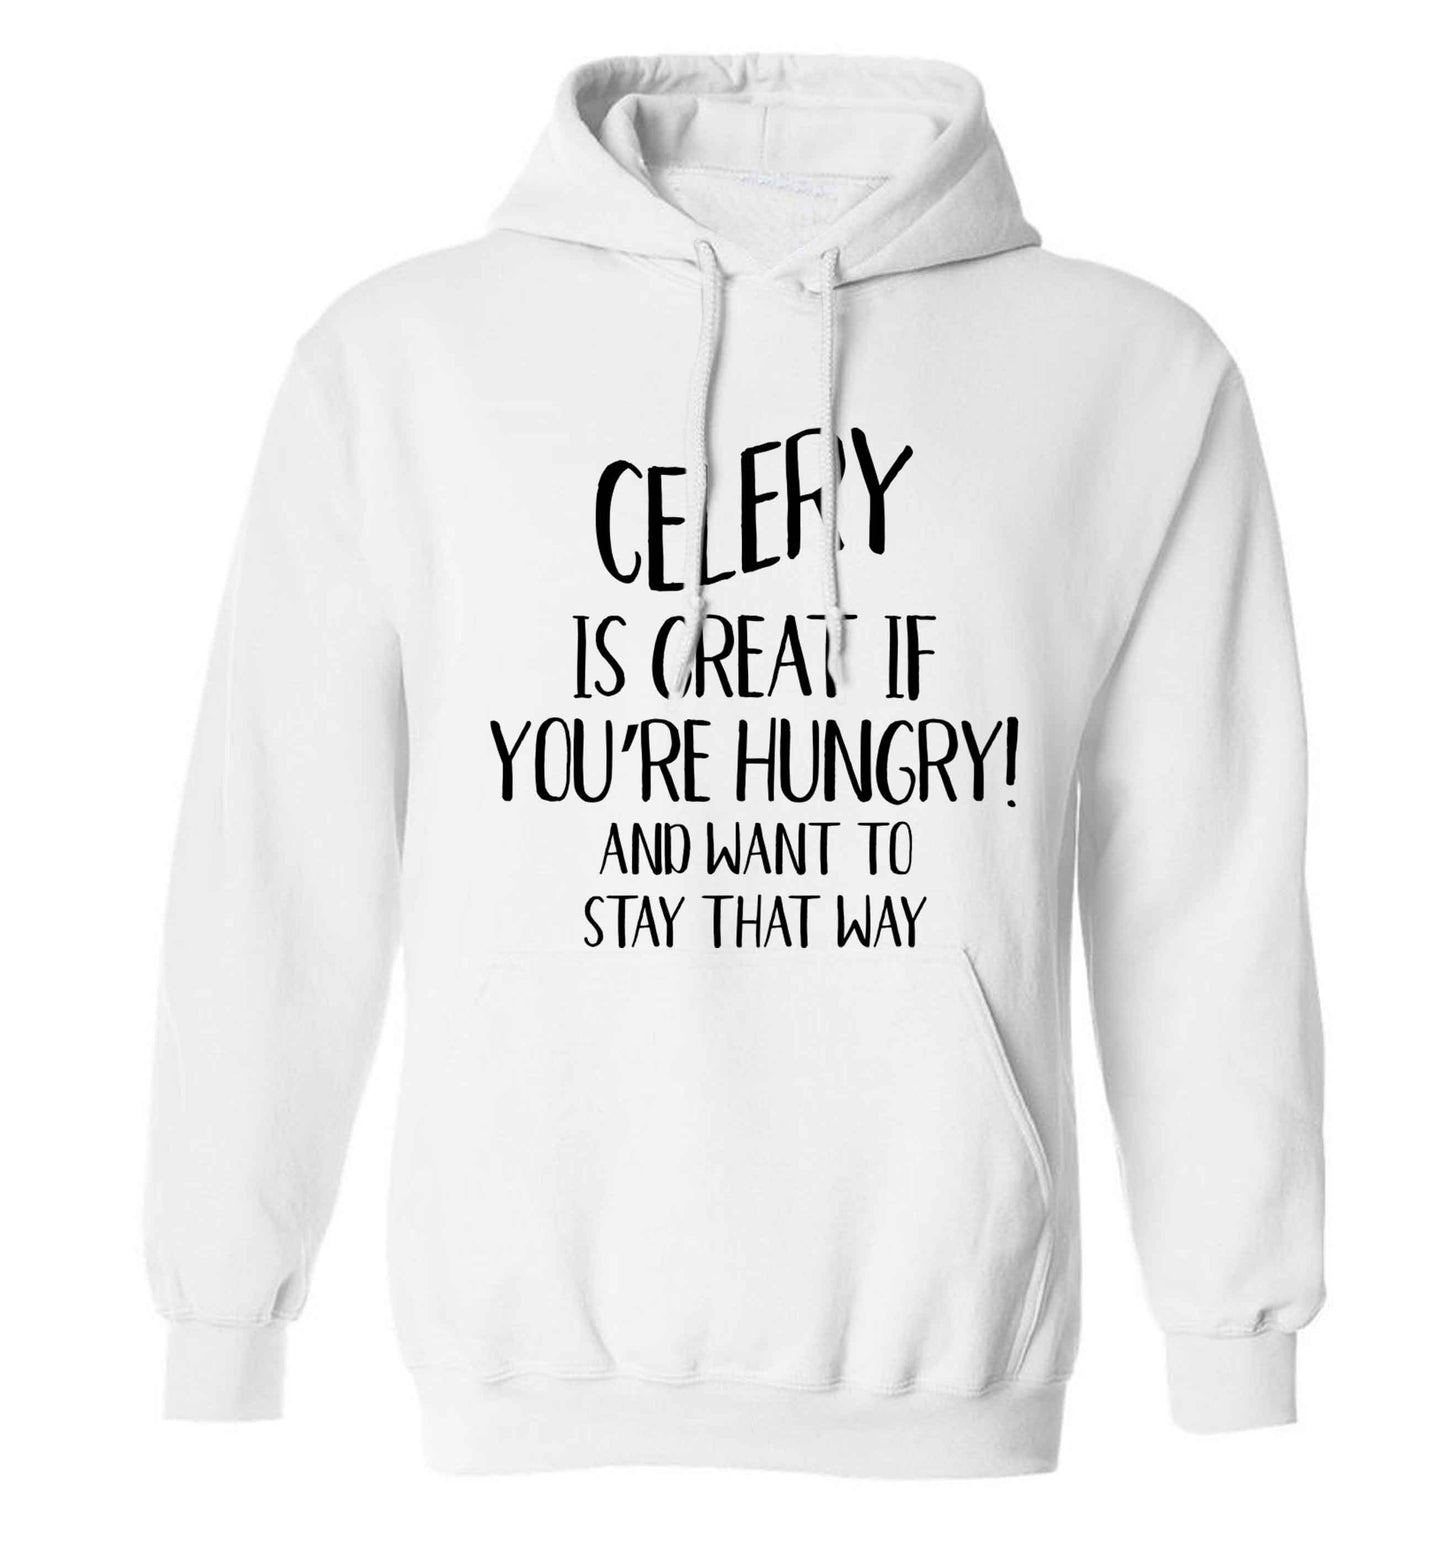 Cellery is great when you're hungry and want to stay that way adults unisex white hoodie 2XL